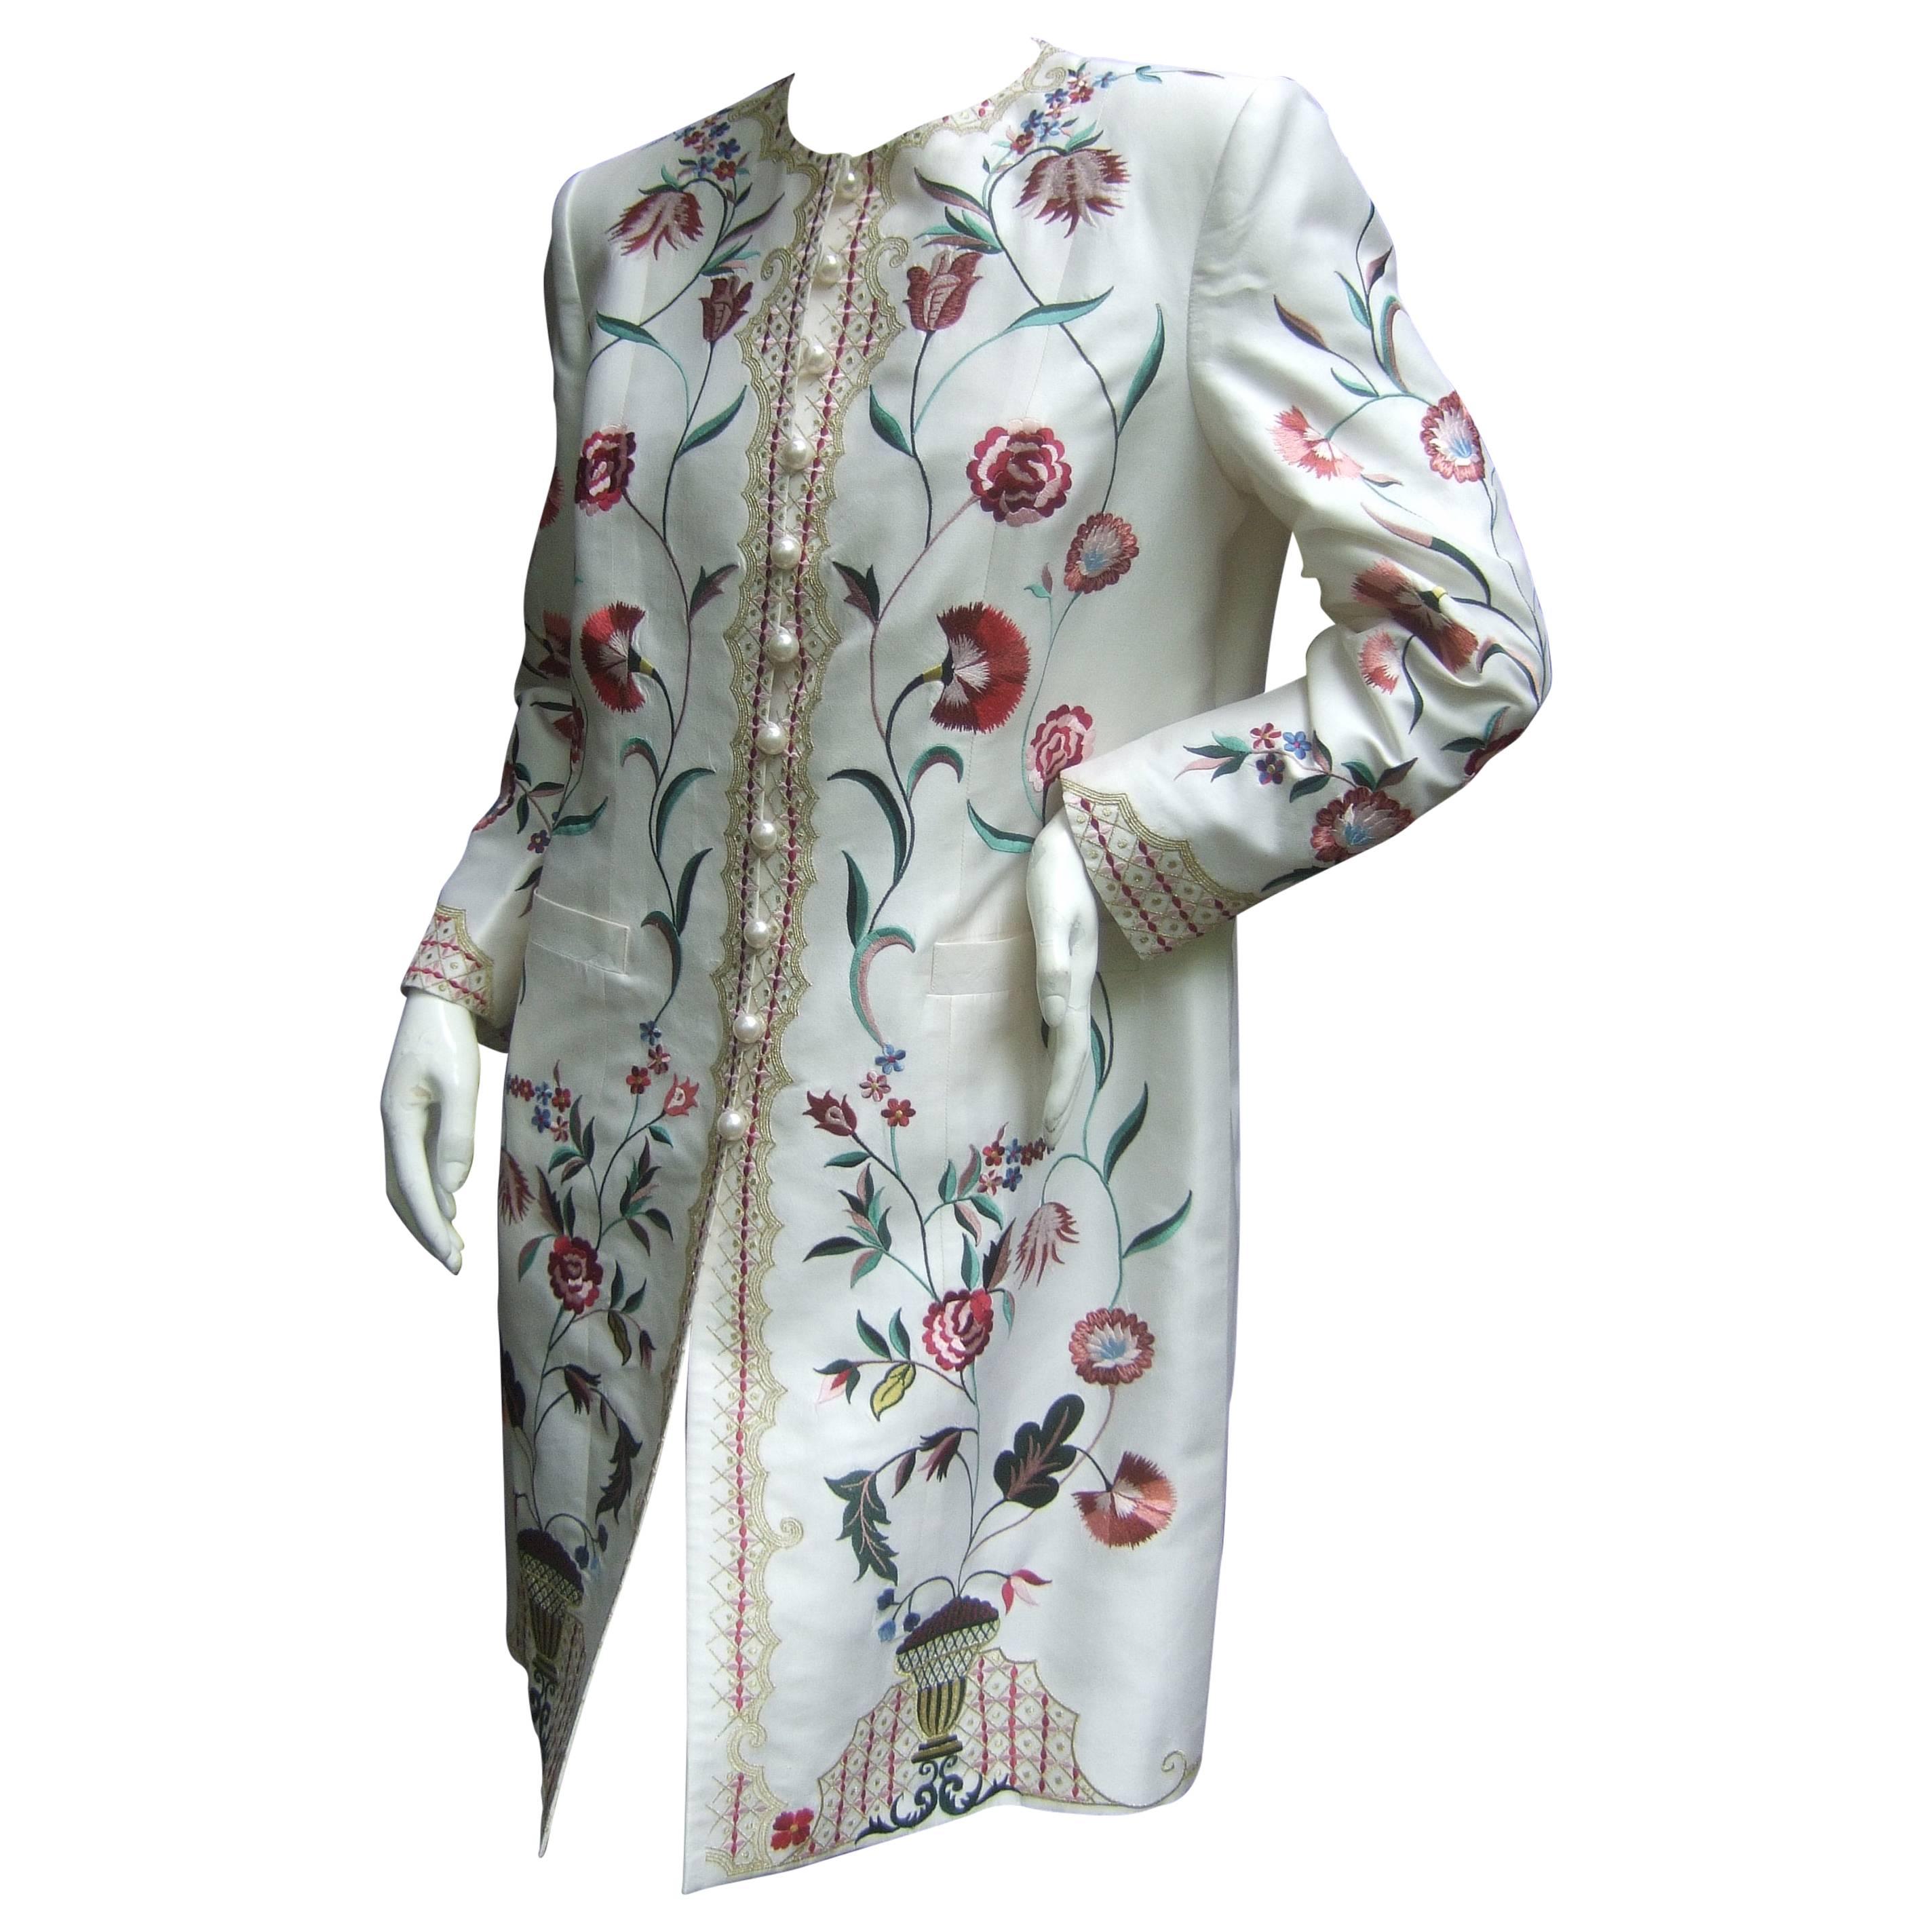 Exotic Haute Couture Embroidered Satin Coat by Max Nugus 